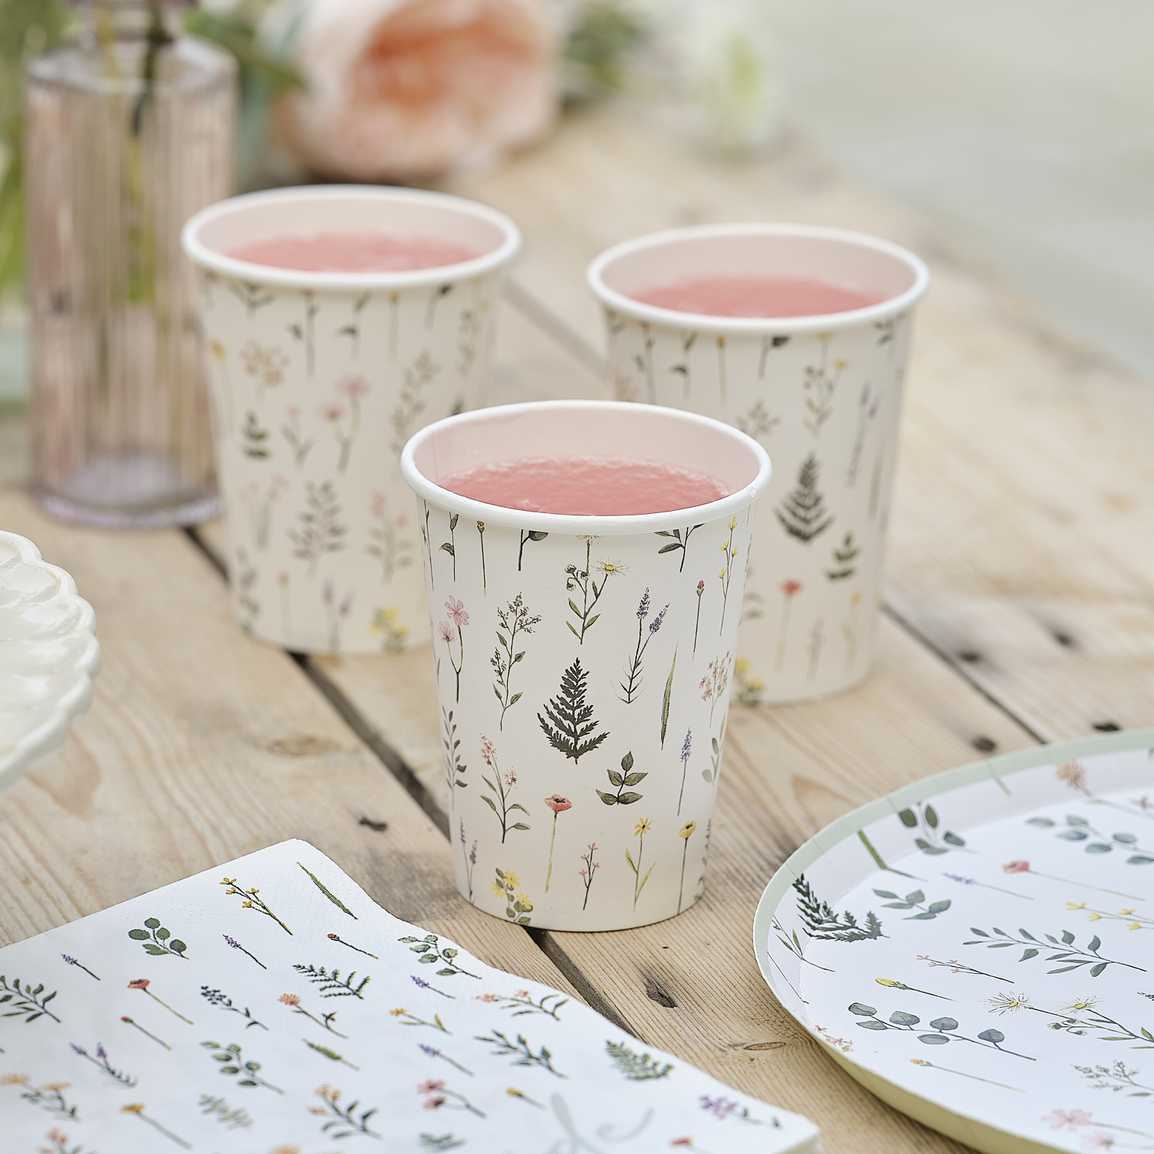 From the new Bridal Bloom range, but perfect for any occasion, these paper cups will add a sophisticated touch to your celebrations.

l8r.it/SlFS

#henparty #bridalbloom #floralhen #hensupplies #gingerray #joliefeteuk
#stylishhen #hennight #hendo #partytable